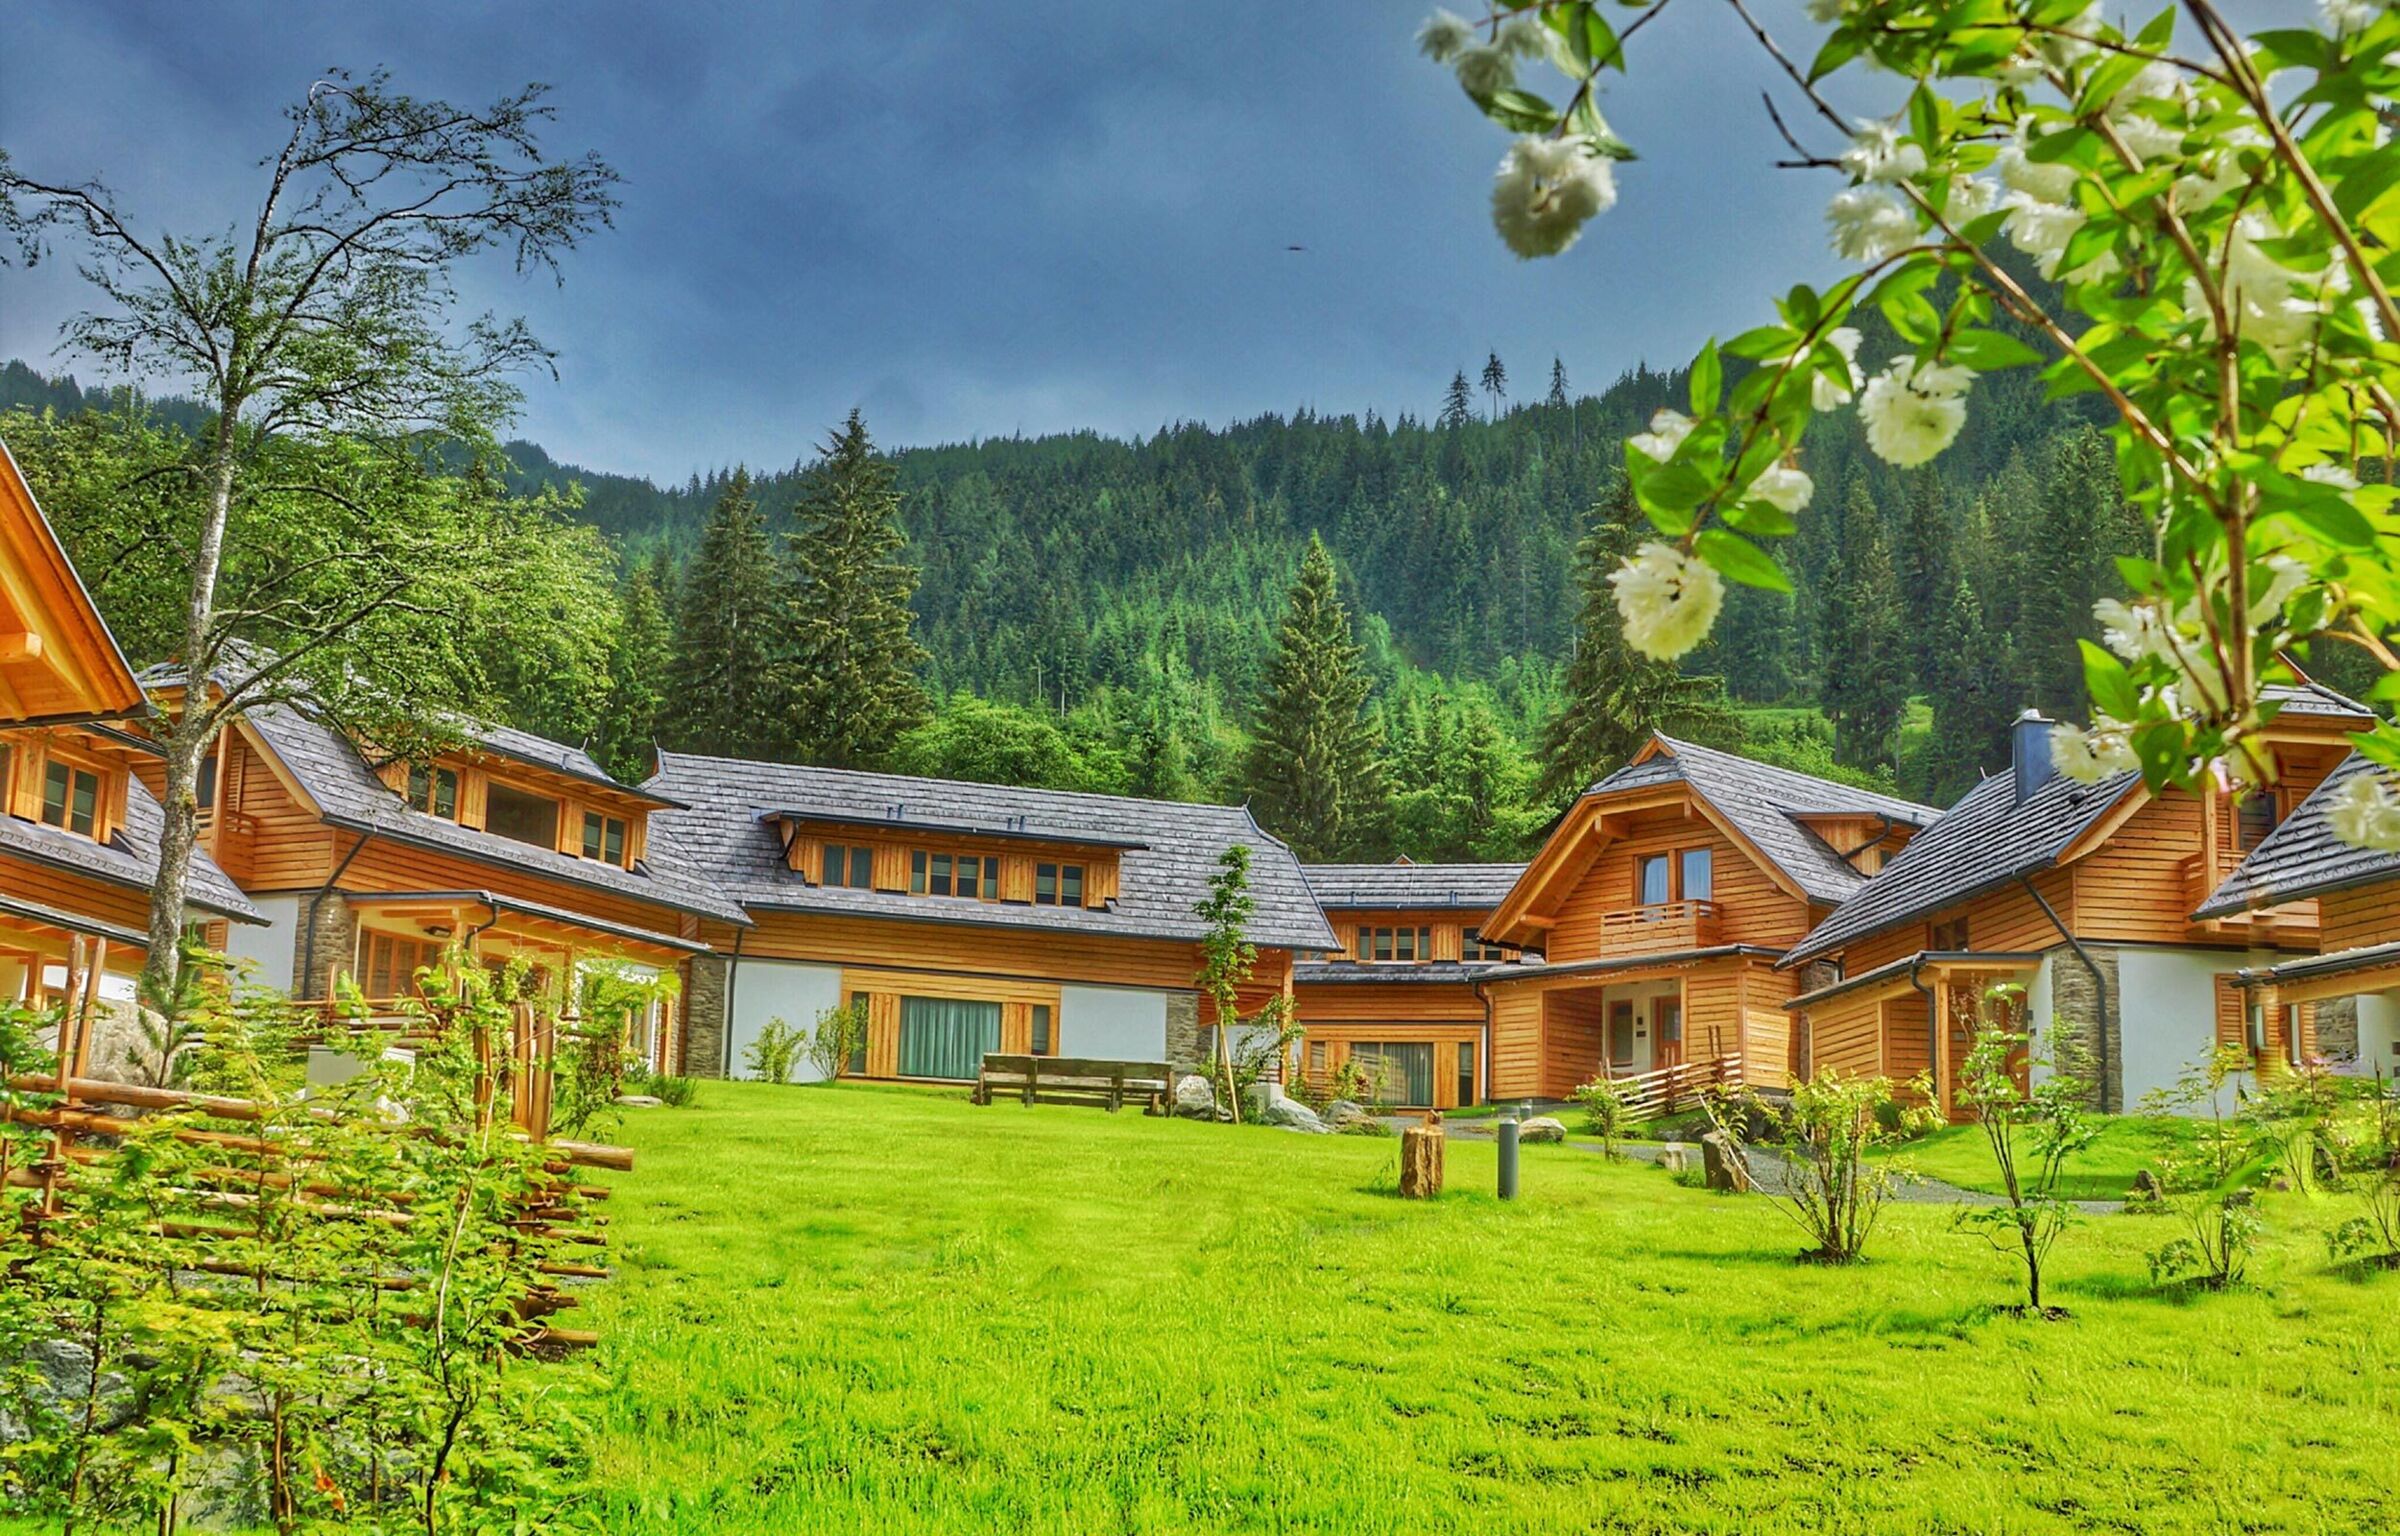 Green and sunny chalet landscape